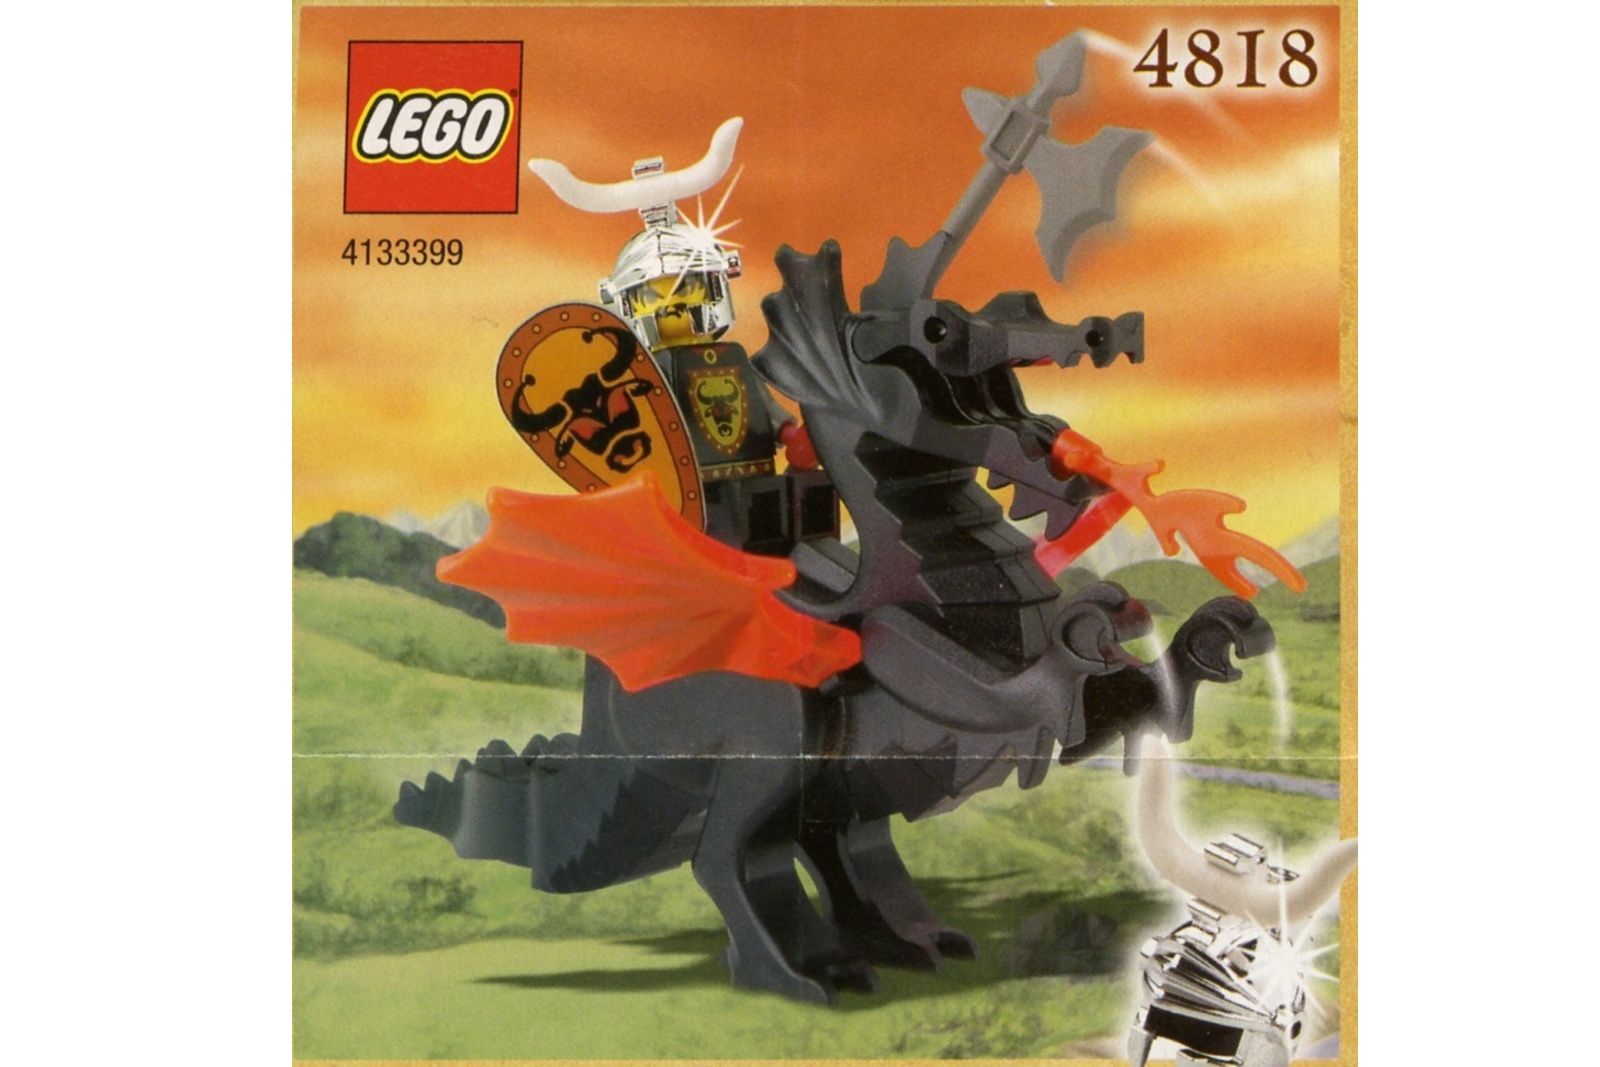 Remember These The Best Lego Sets Of All Time image 188